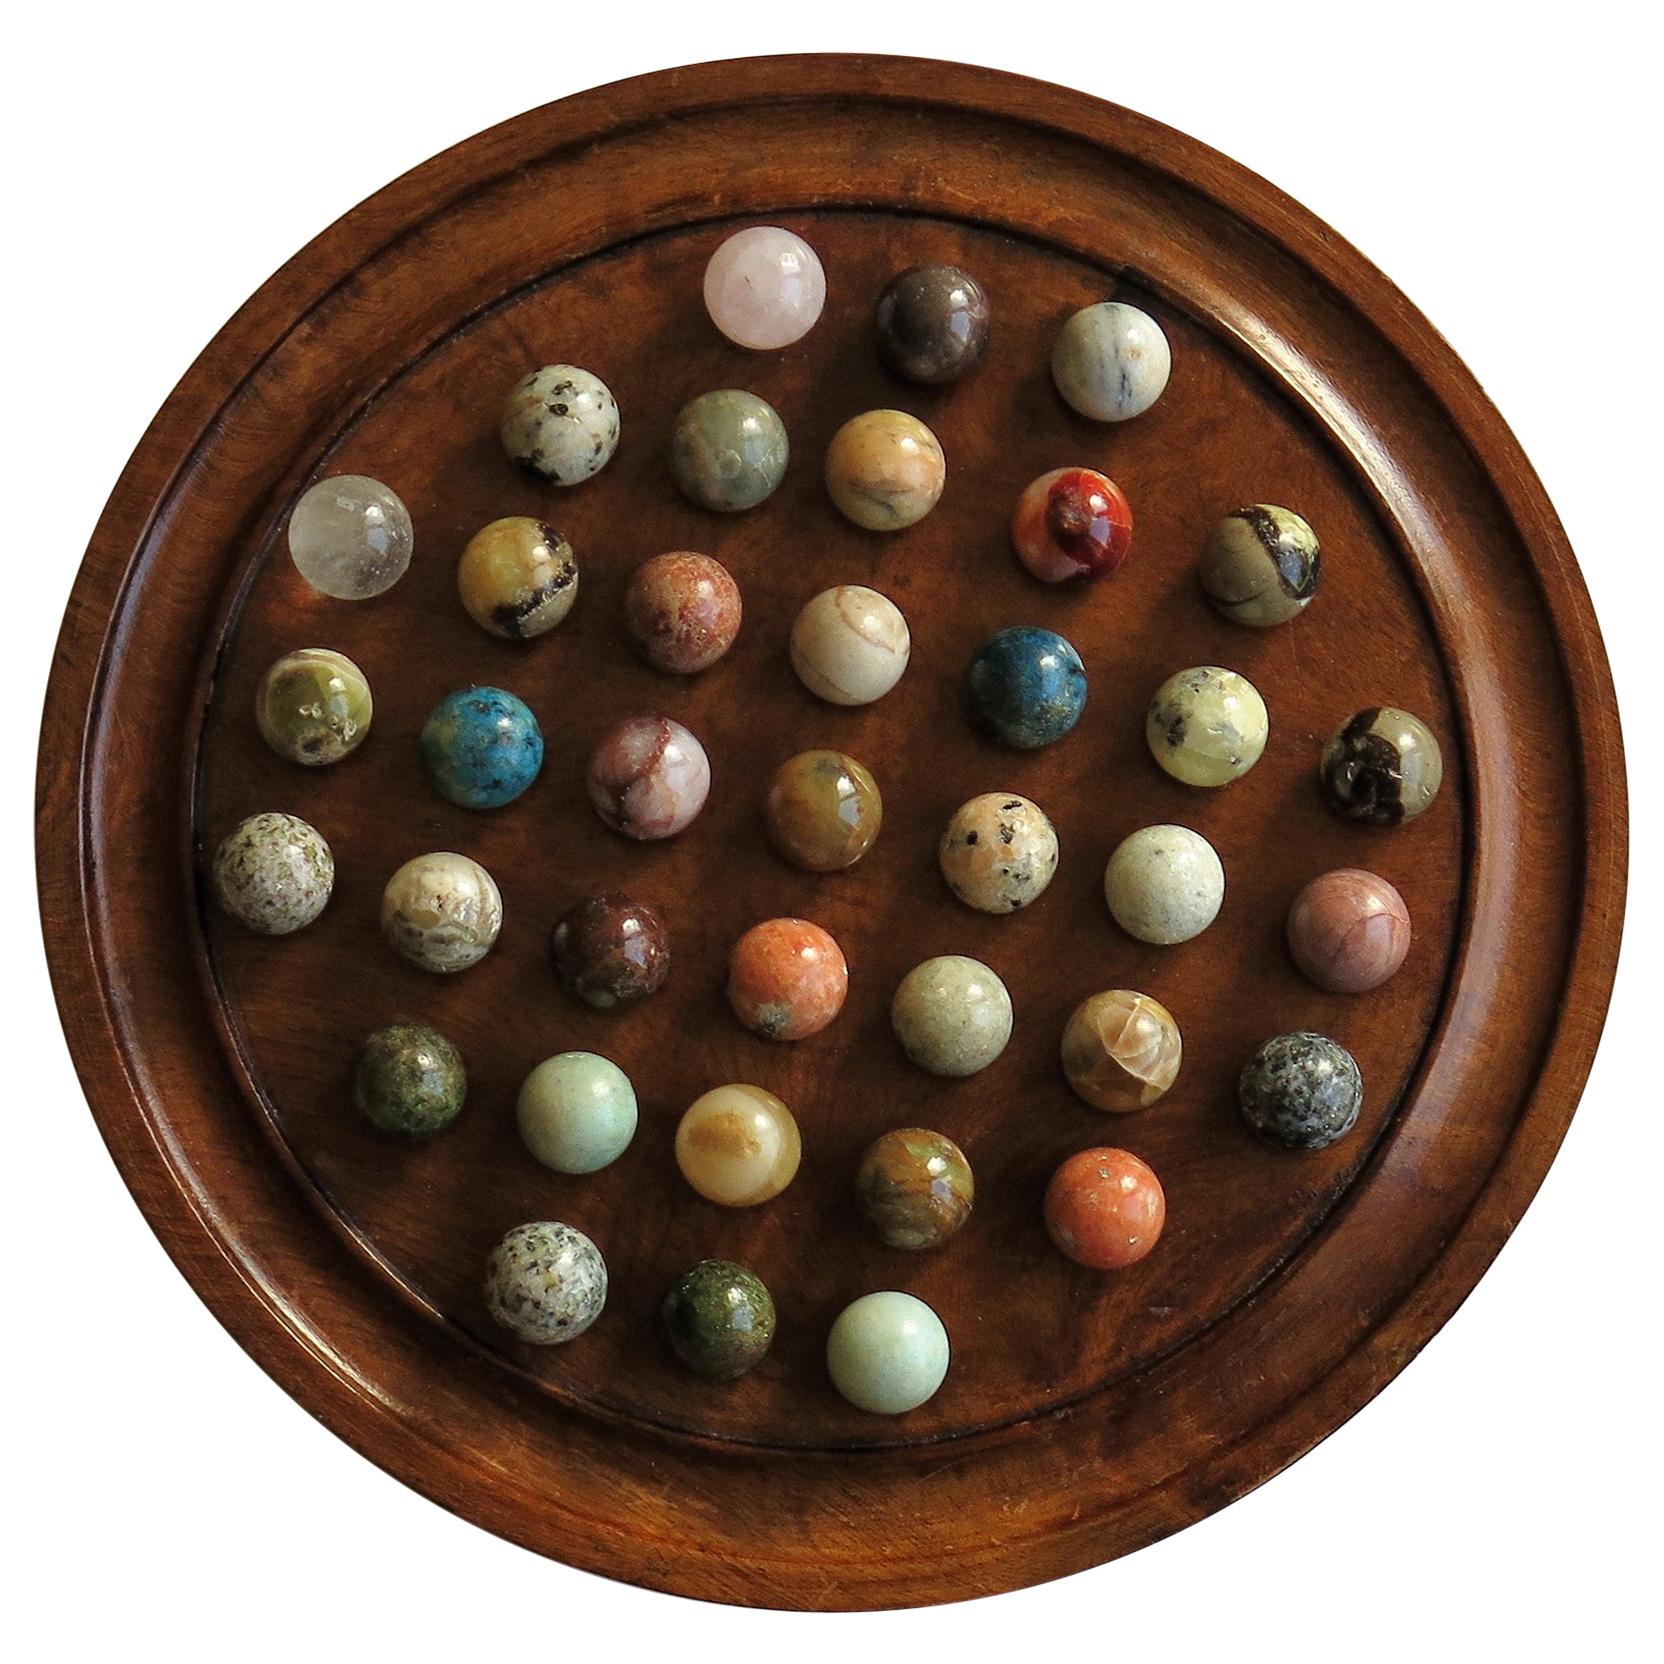 Fine Marble Solitaire Game Hardwood Board 37 Agate Mineral Stone Marbles, French